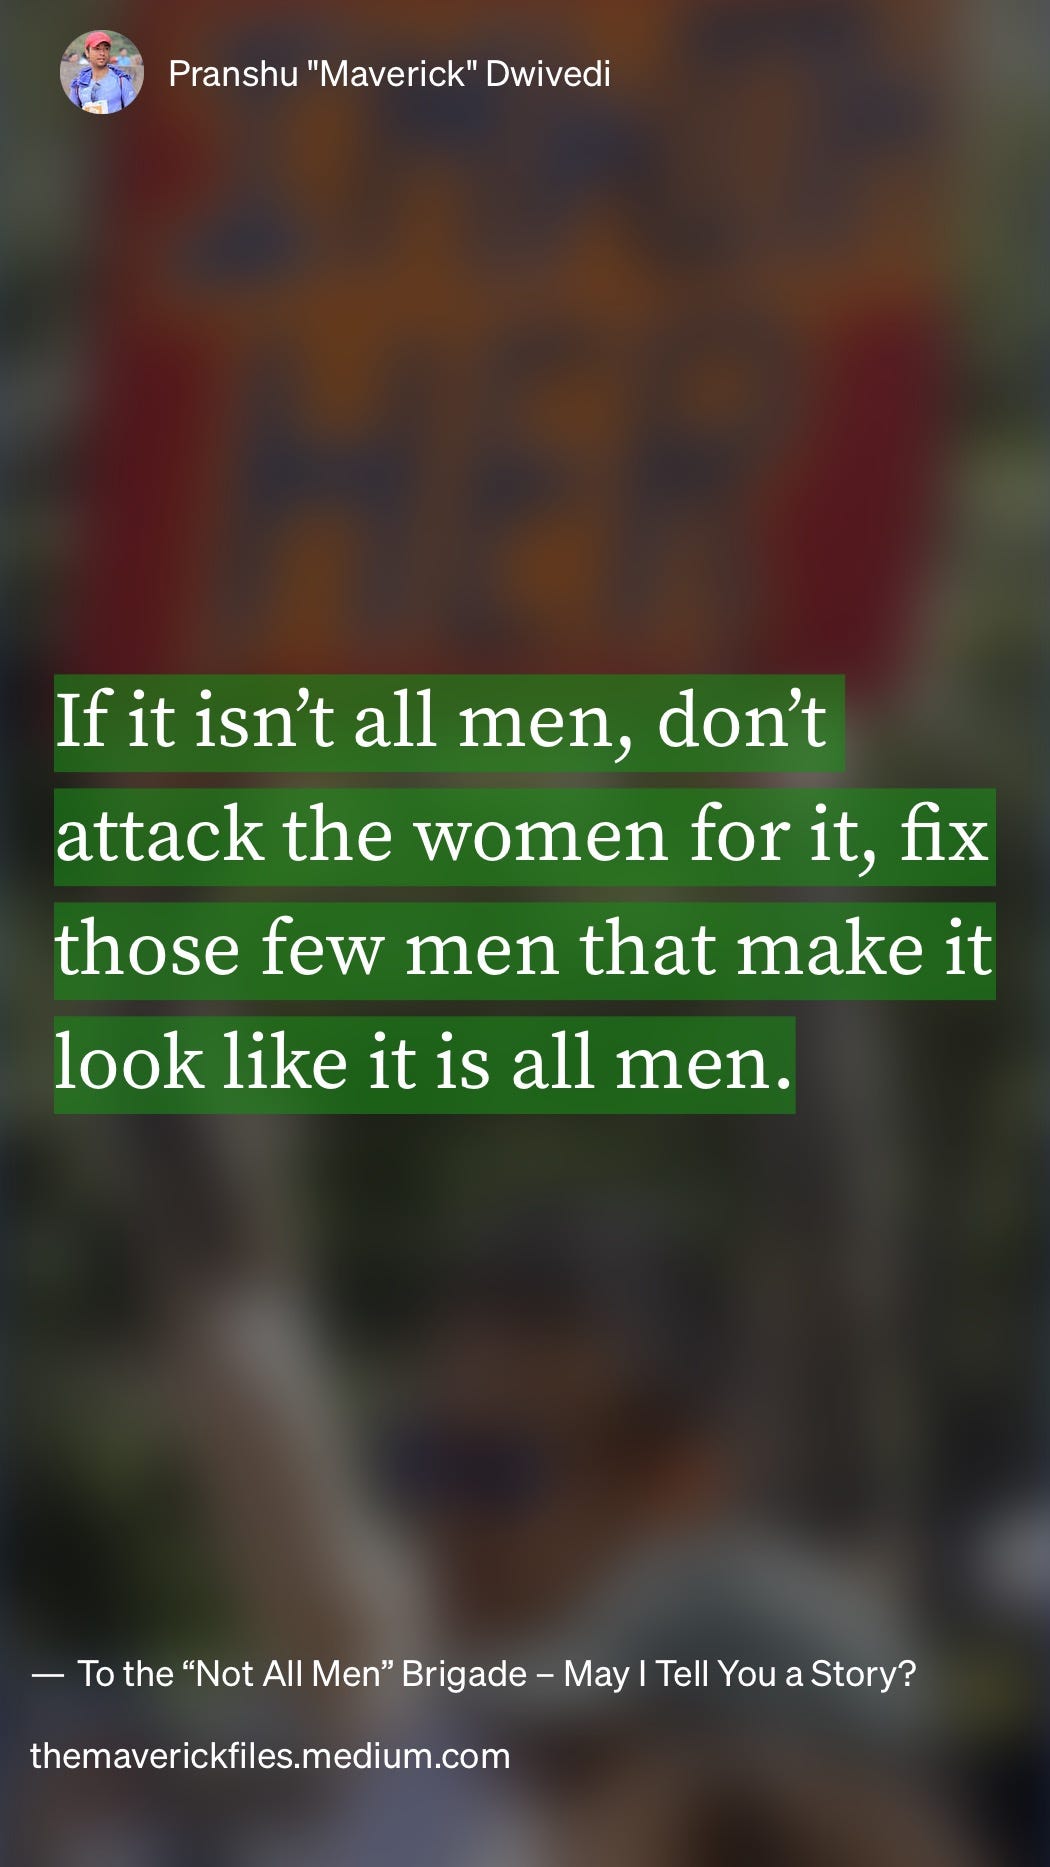 quote from an essay that says: if it isn't all men, don't attack the women for it, fix those few men that make it look like it is all men.